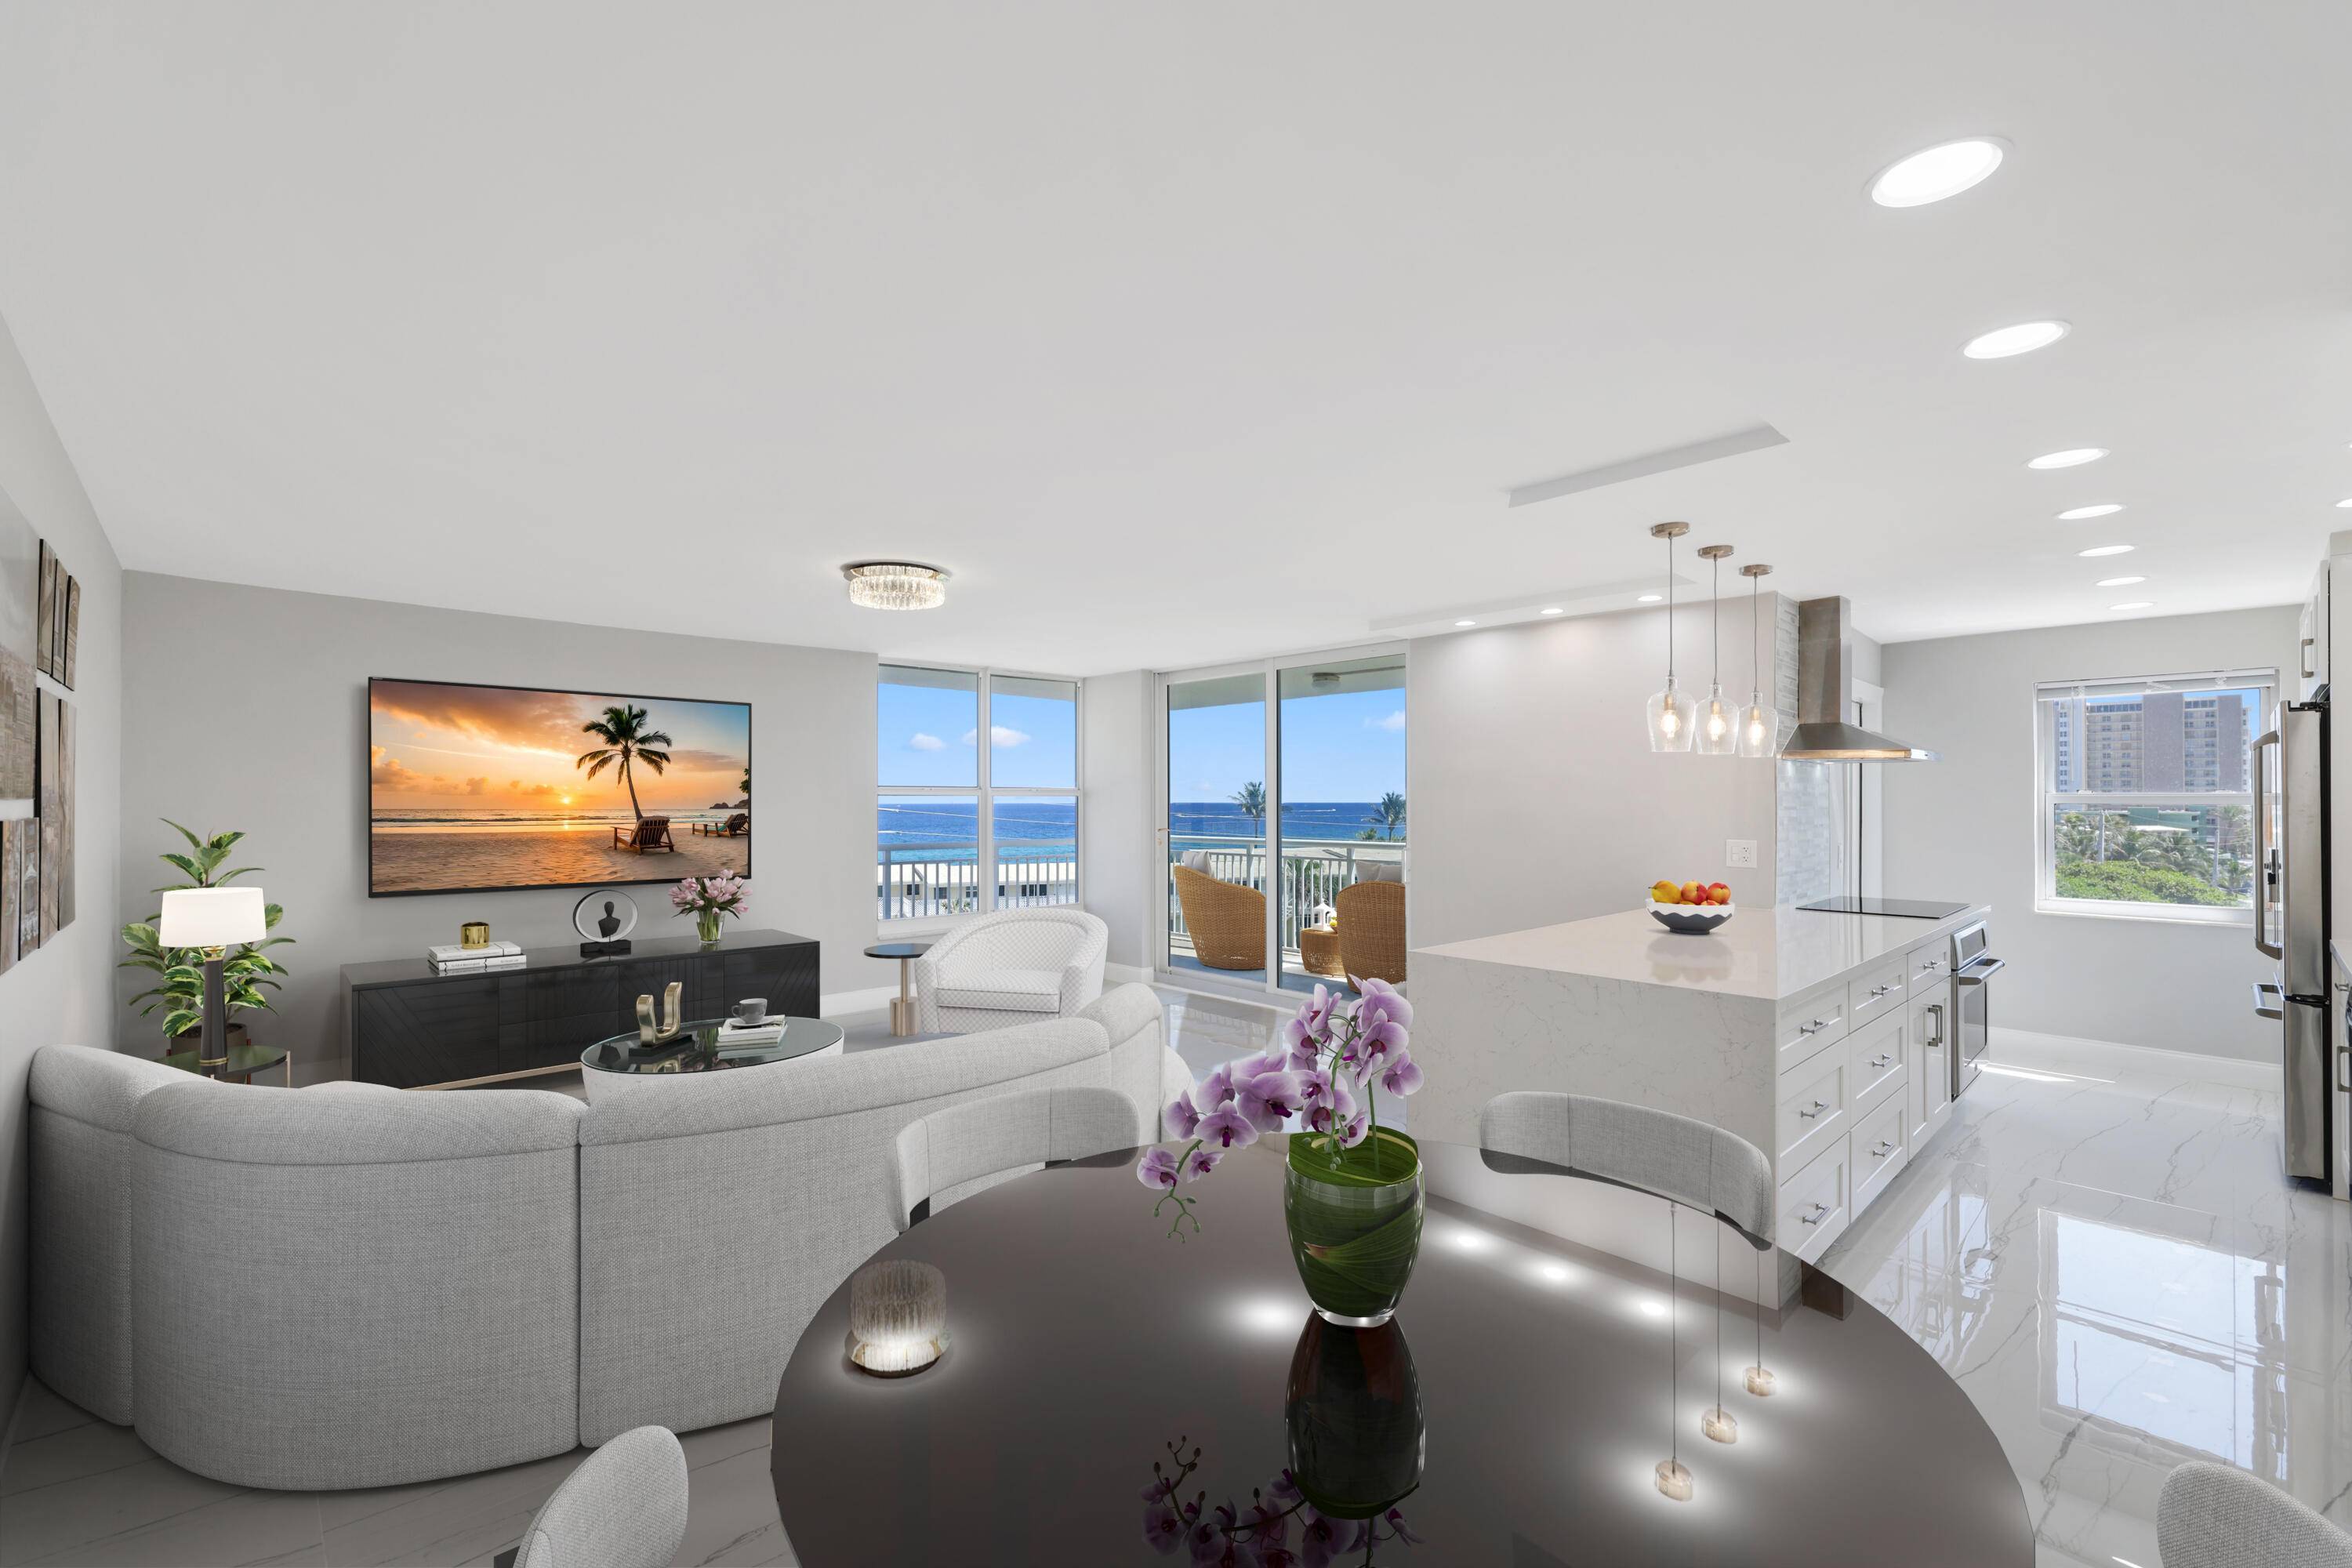 Introducing a stunning condo on Millionaire Mile, offering breathtaking ocean and Intracoastal views between Deerfield Beach Pier and Lighthouse Tower.